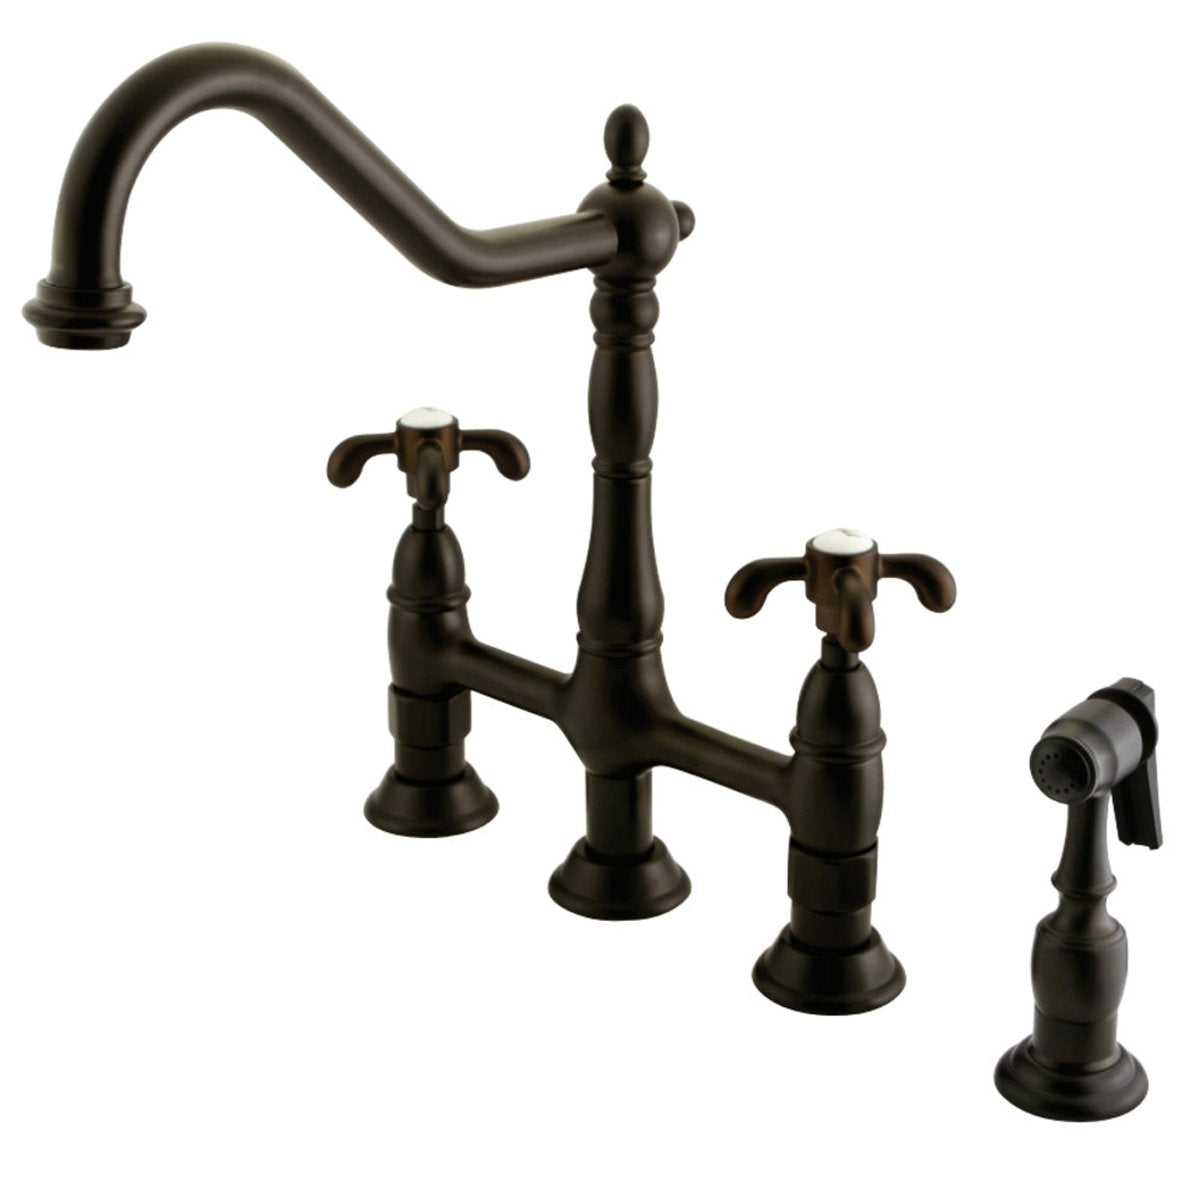 Kingston Brass French Country Widespread Kitchen Faucet, Oil Rubbed Bronze  - NBI Drainboard Sinks